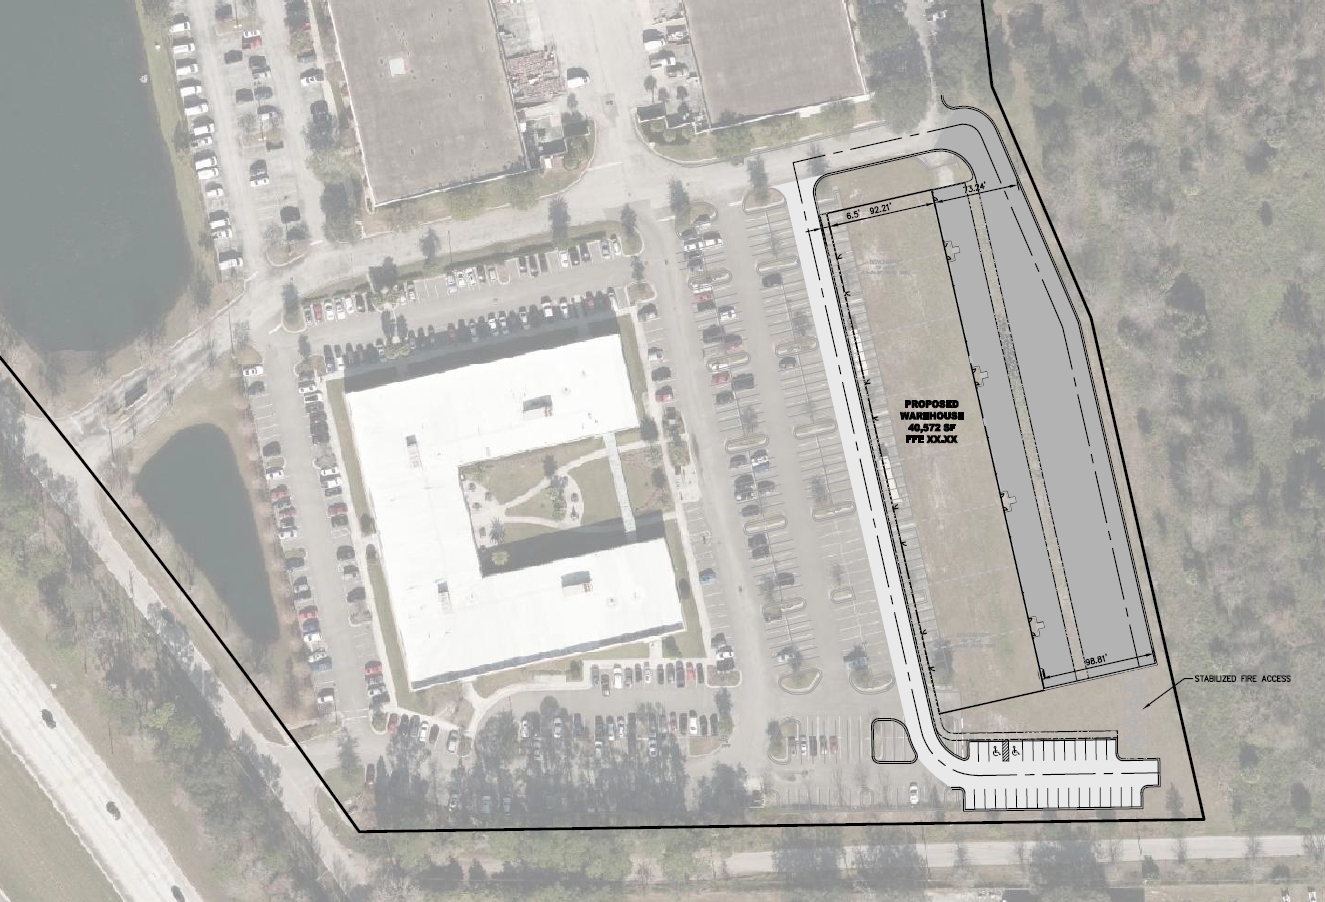 Salisbury Business Park is gaining a 40,572-square-foot building.